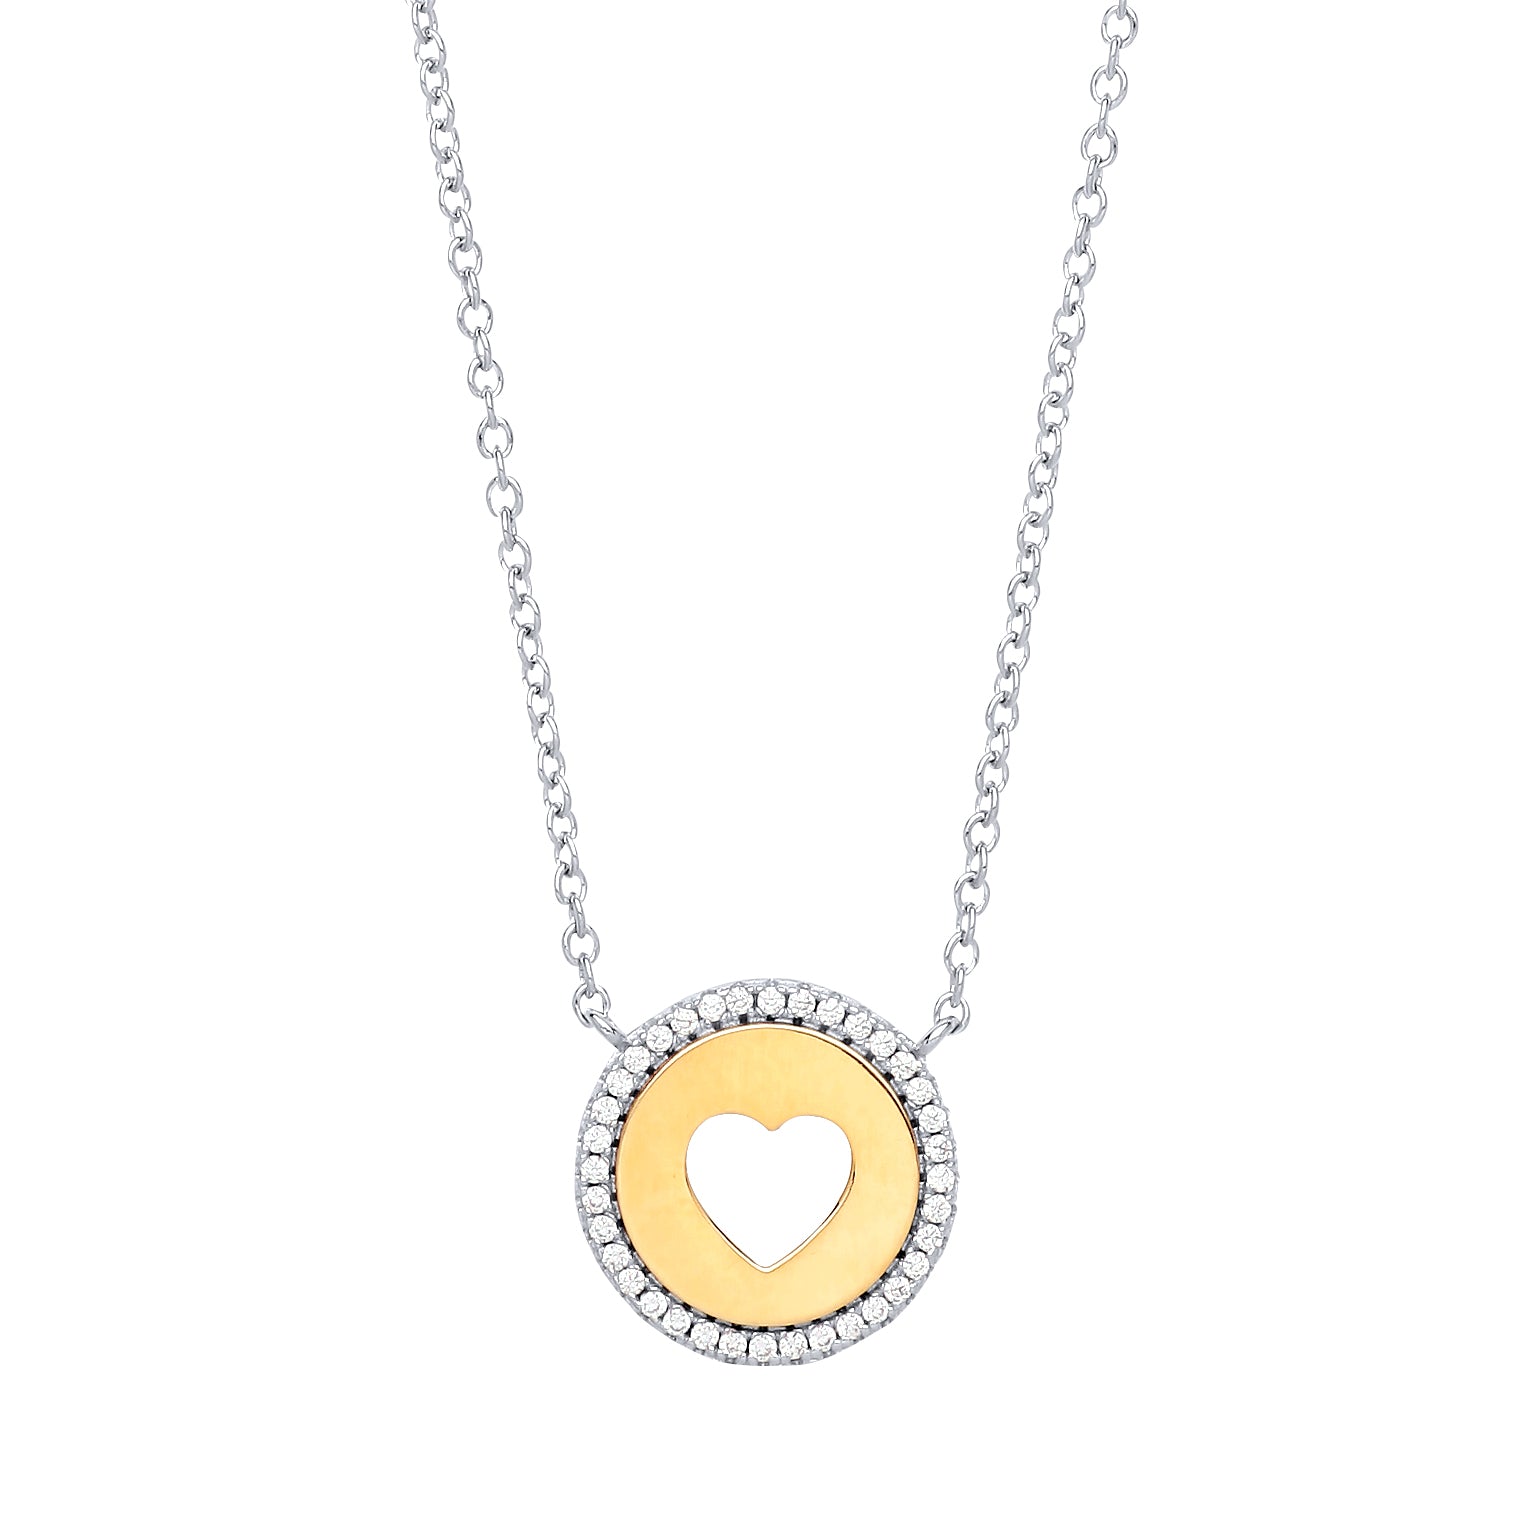 Gilded Silver  CZ Love Heart Halo Medallion Necklace 17 + 2 inch - GVK226